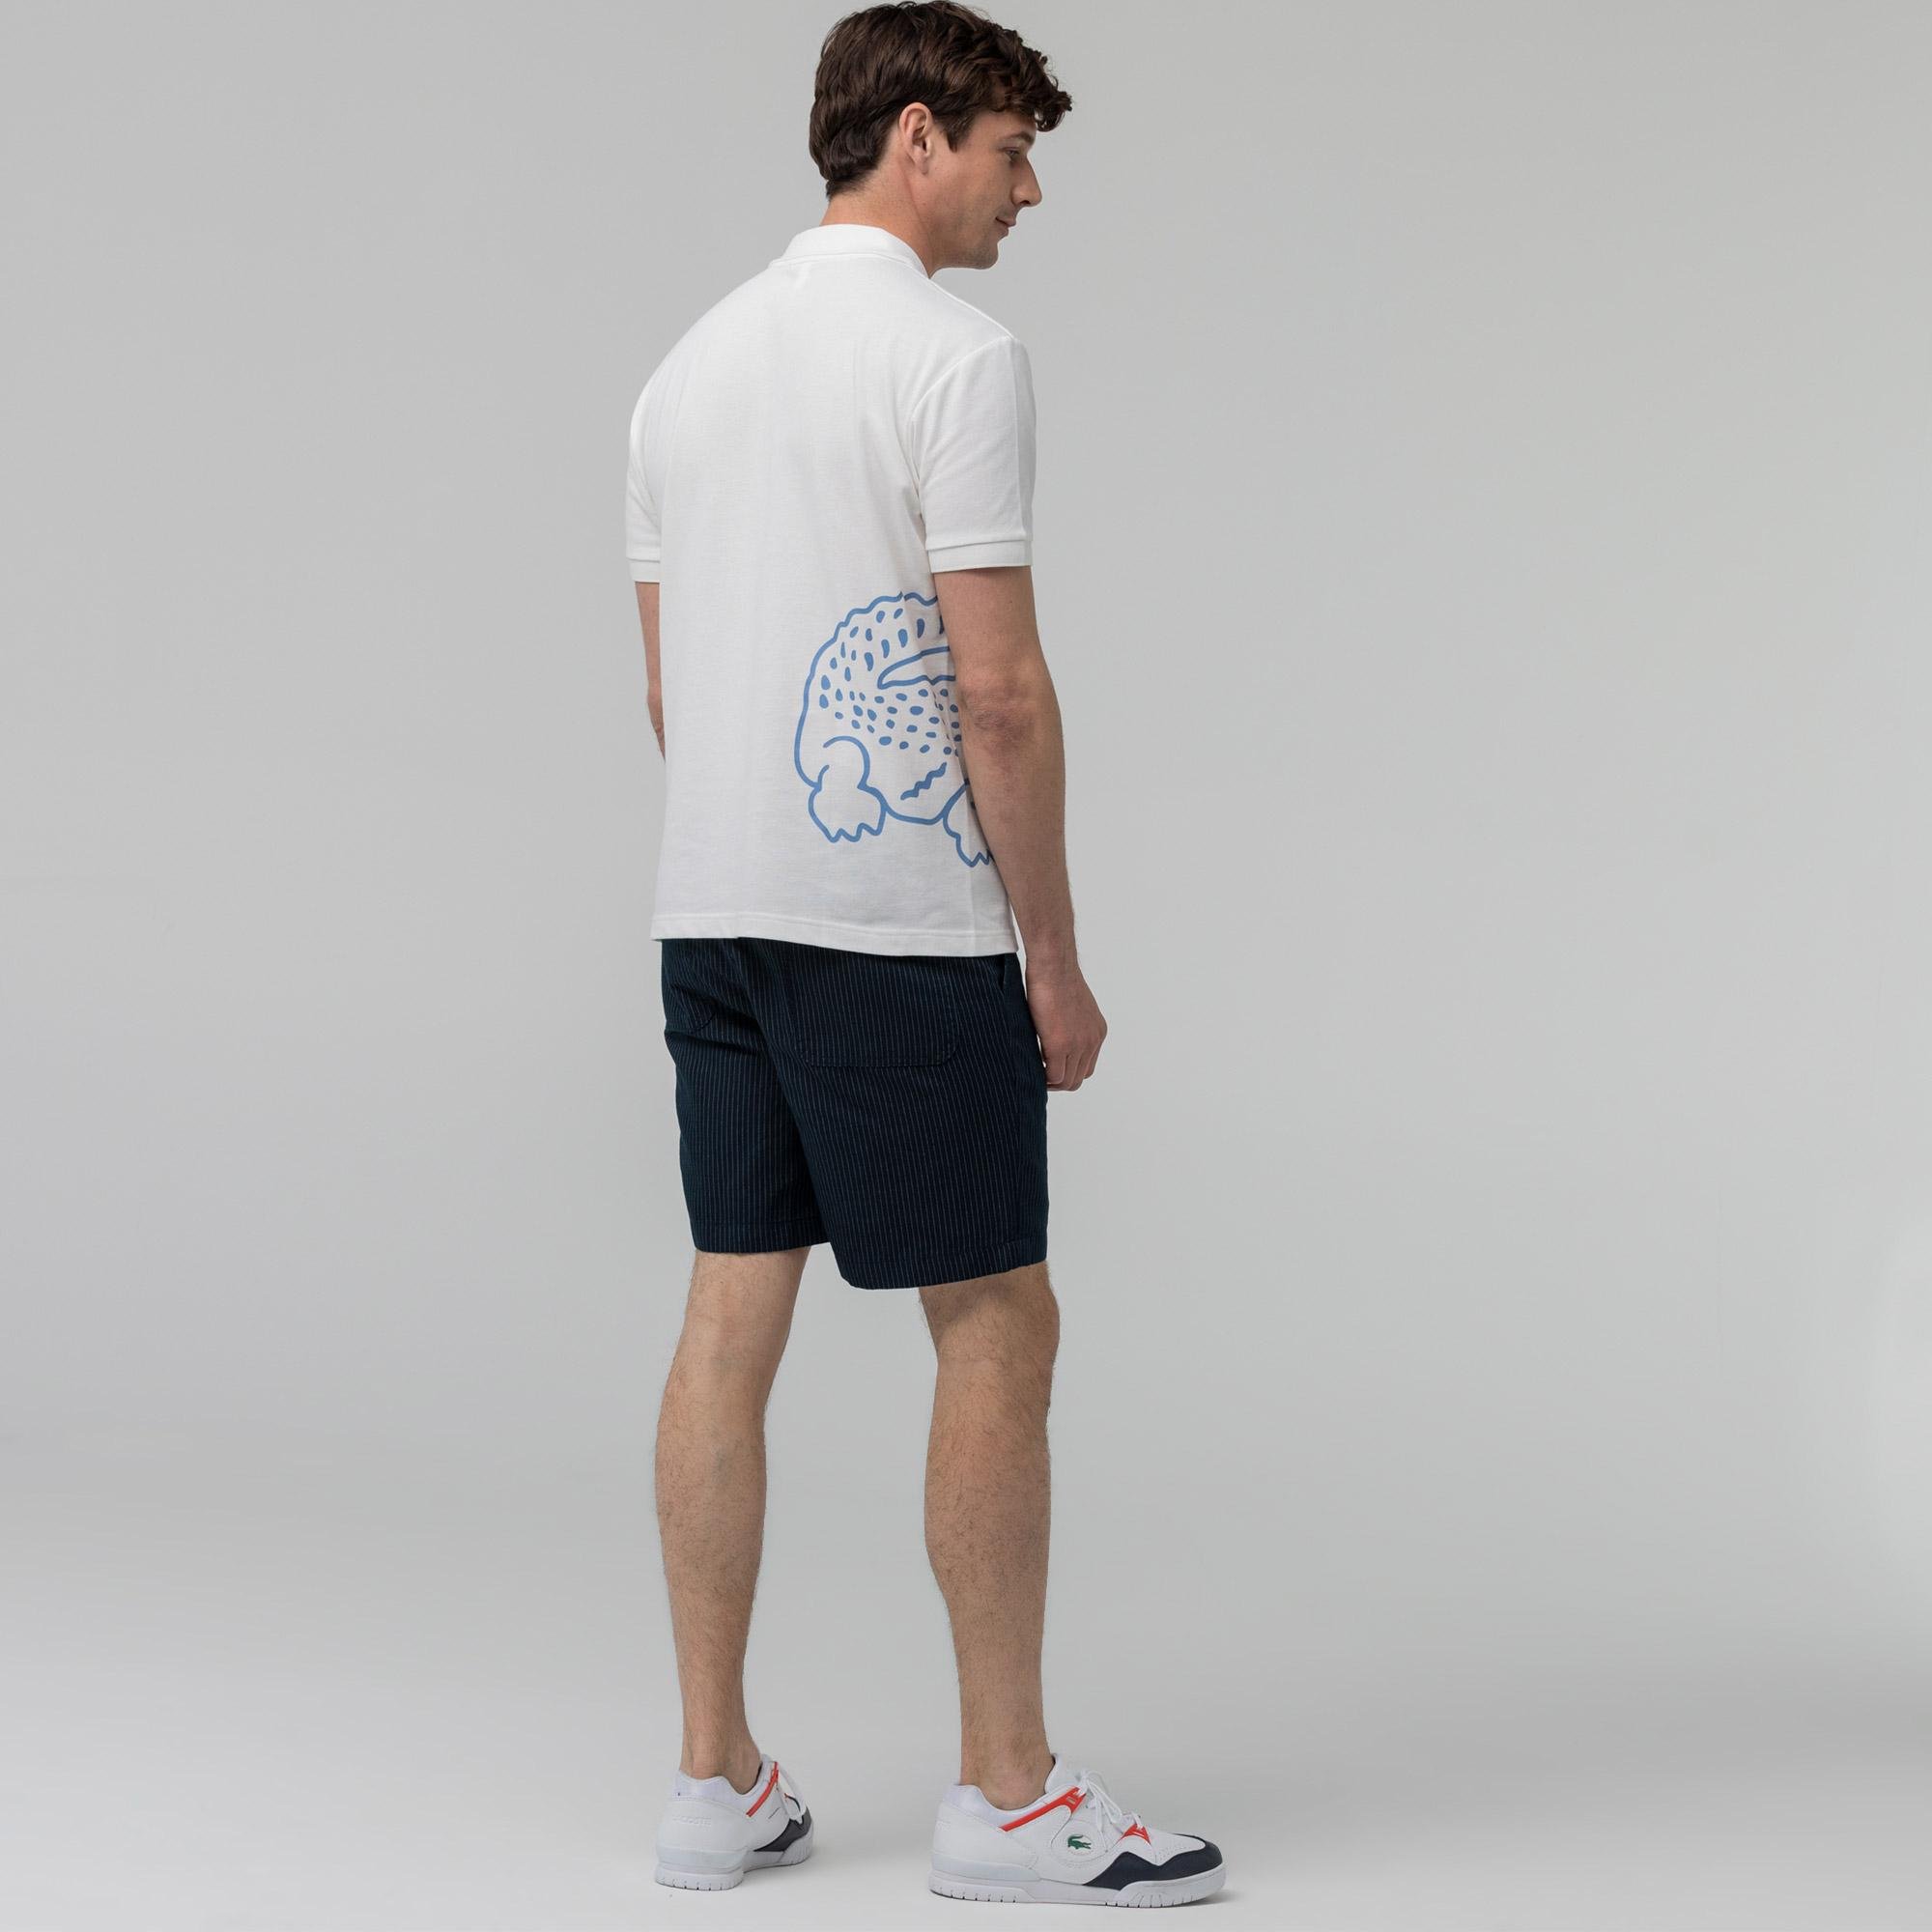 Lacoste Men's Bermuda Shorts With Fine Stripes Made Of A Cotton And Linen Blend